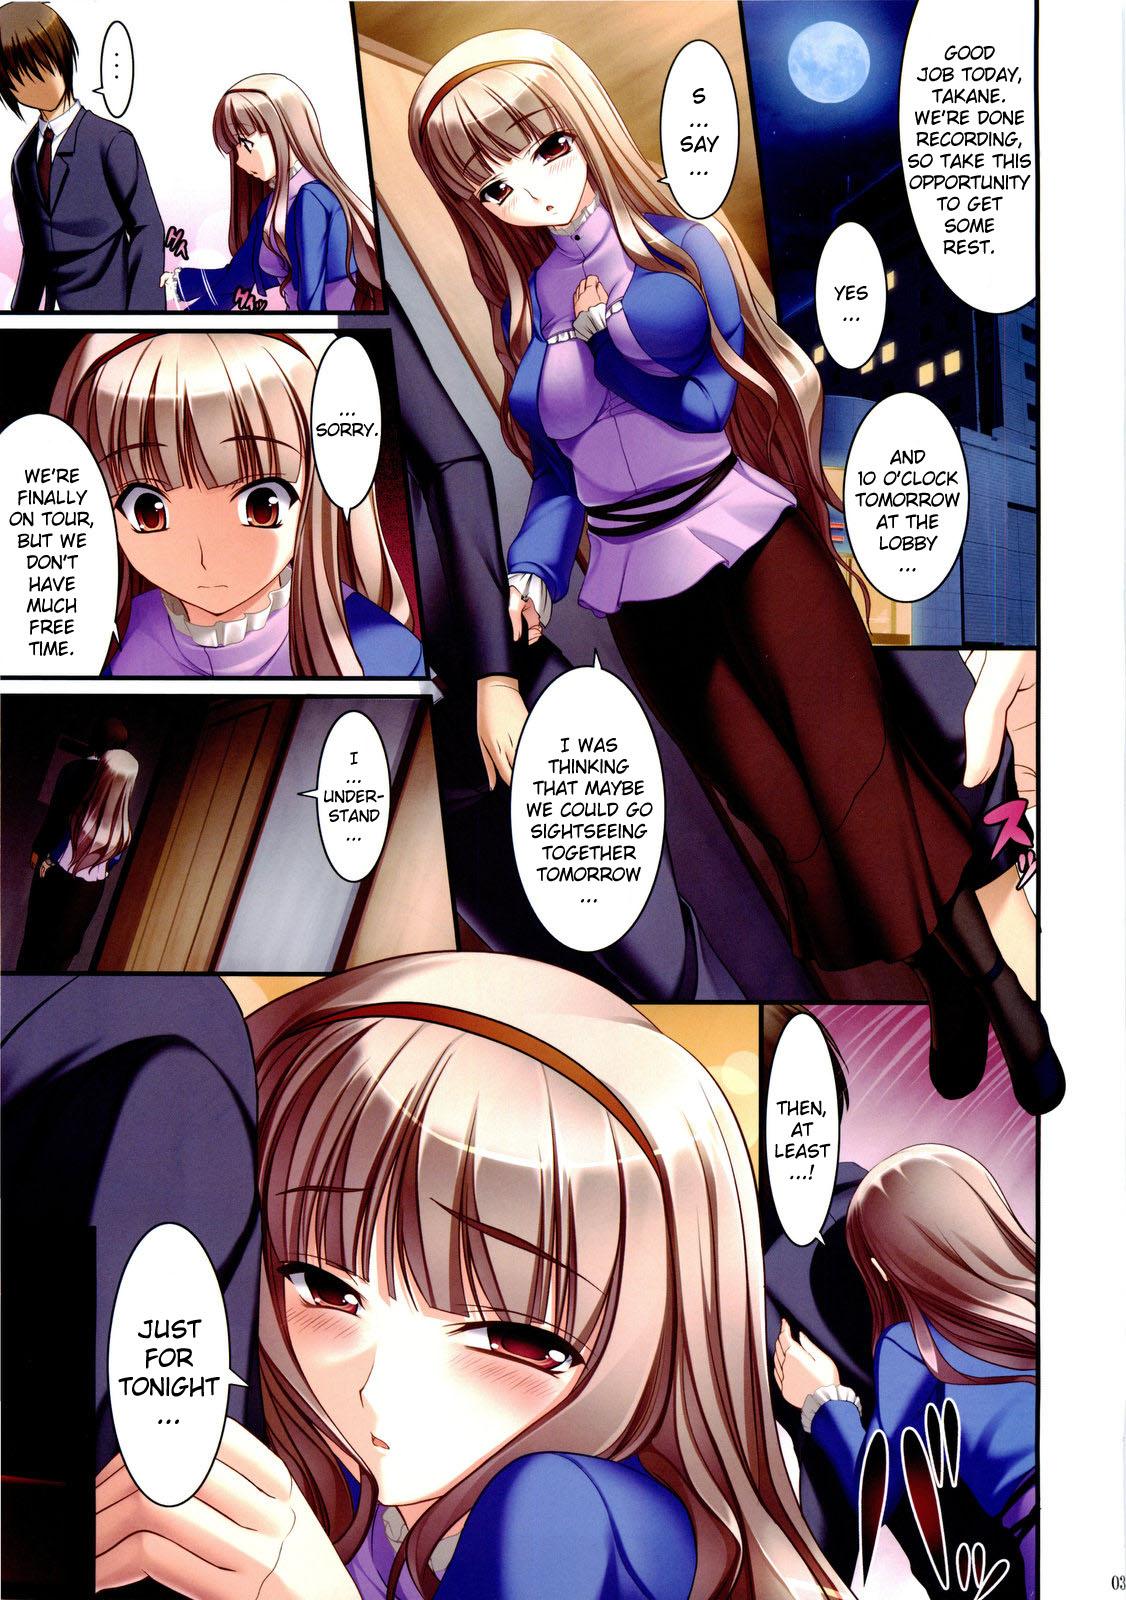 Best Blowjob Favorite Memory's - The idolmaster Mature - Page 2